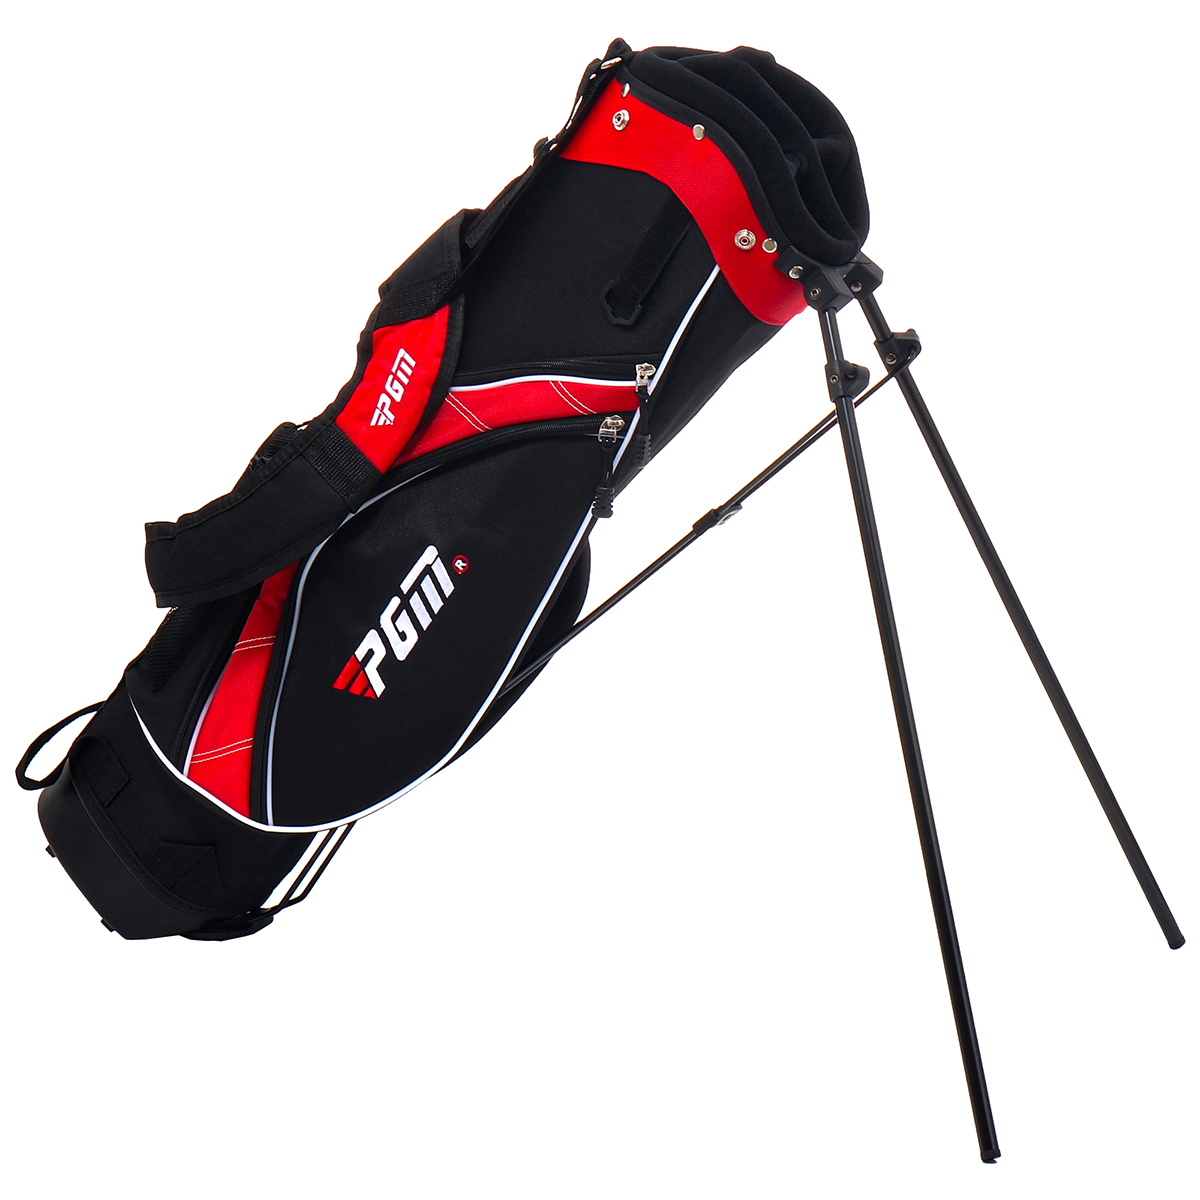 Childrens-Golf-Bag-Golf-Support-Ultra-Light-Stand-Portable-Large-Capacity-Double-Shoulder-Strap-For--1810143-9